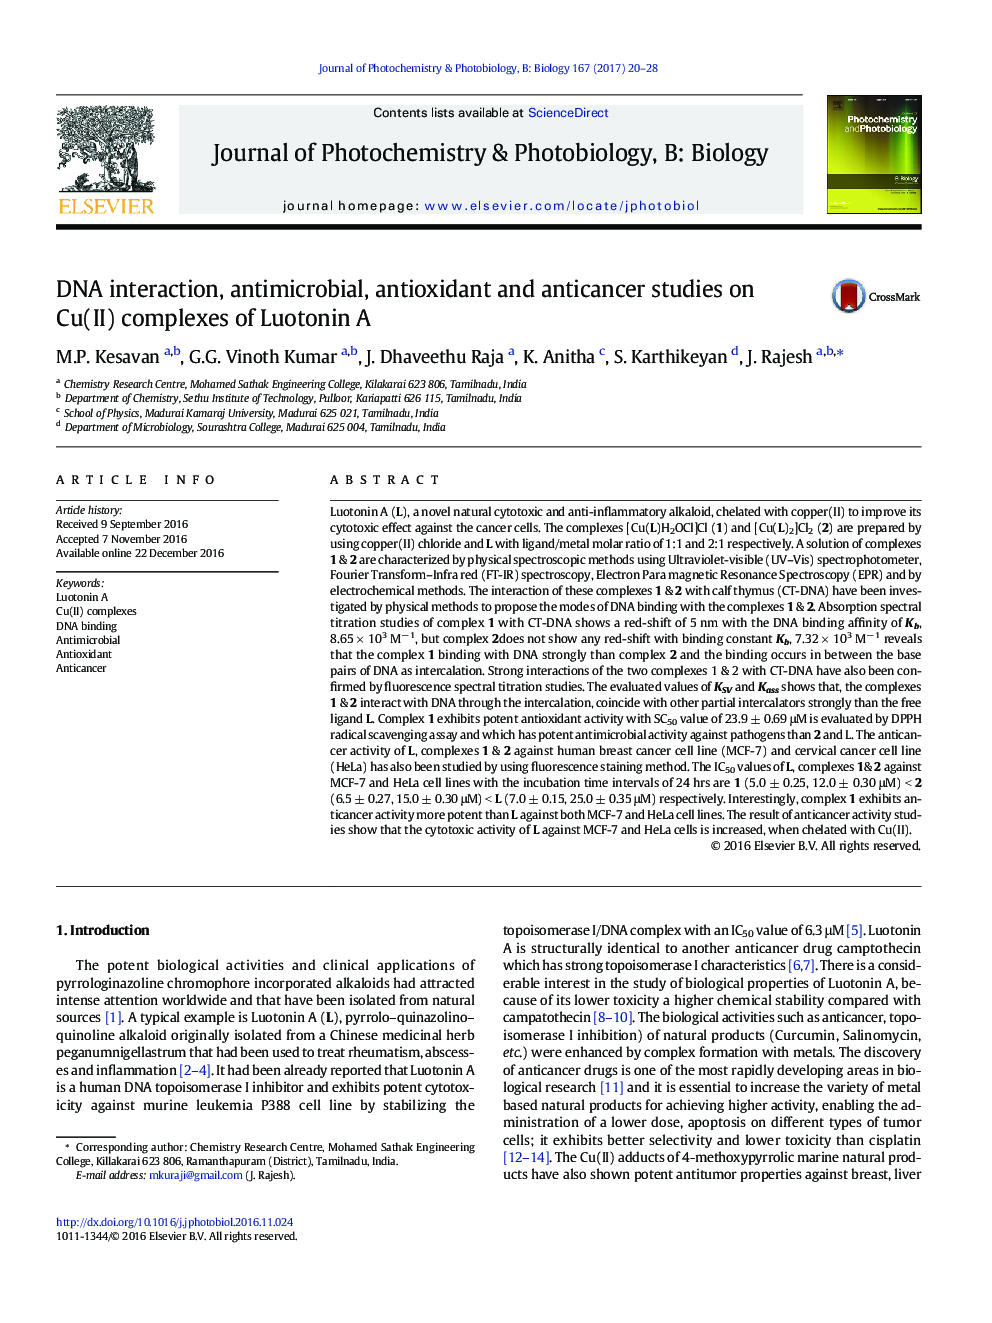 DNA interaction, antimicrobial, antioxidant and anticancer studies on Cu(II) complexes of Luotonin A